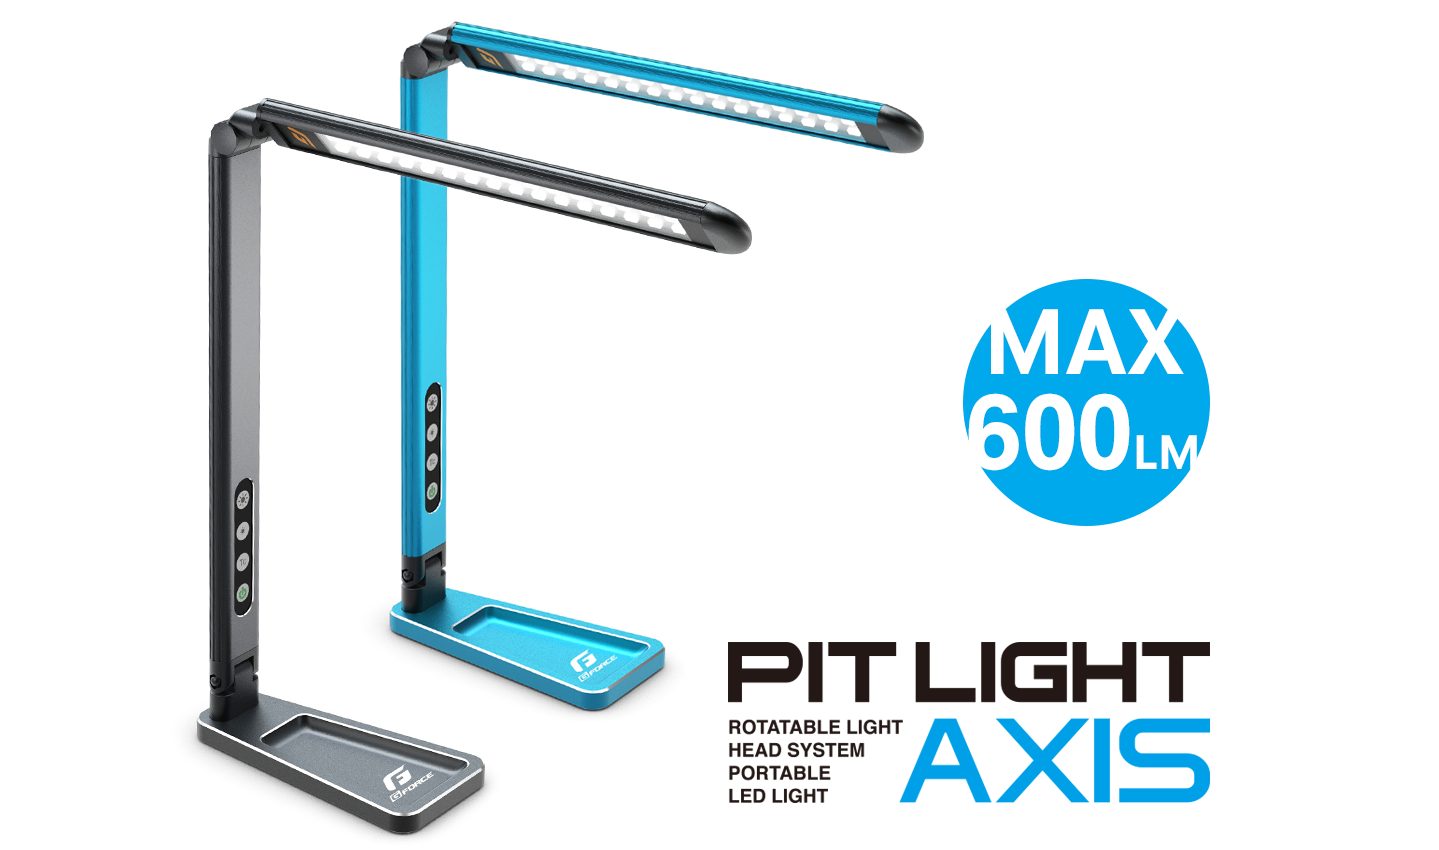 Pitlight AXIS